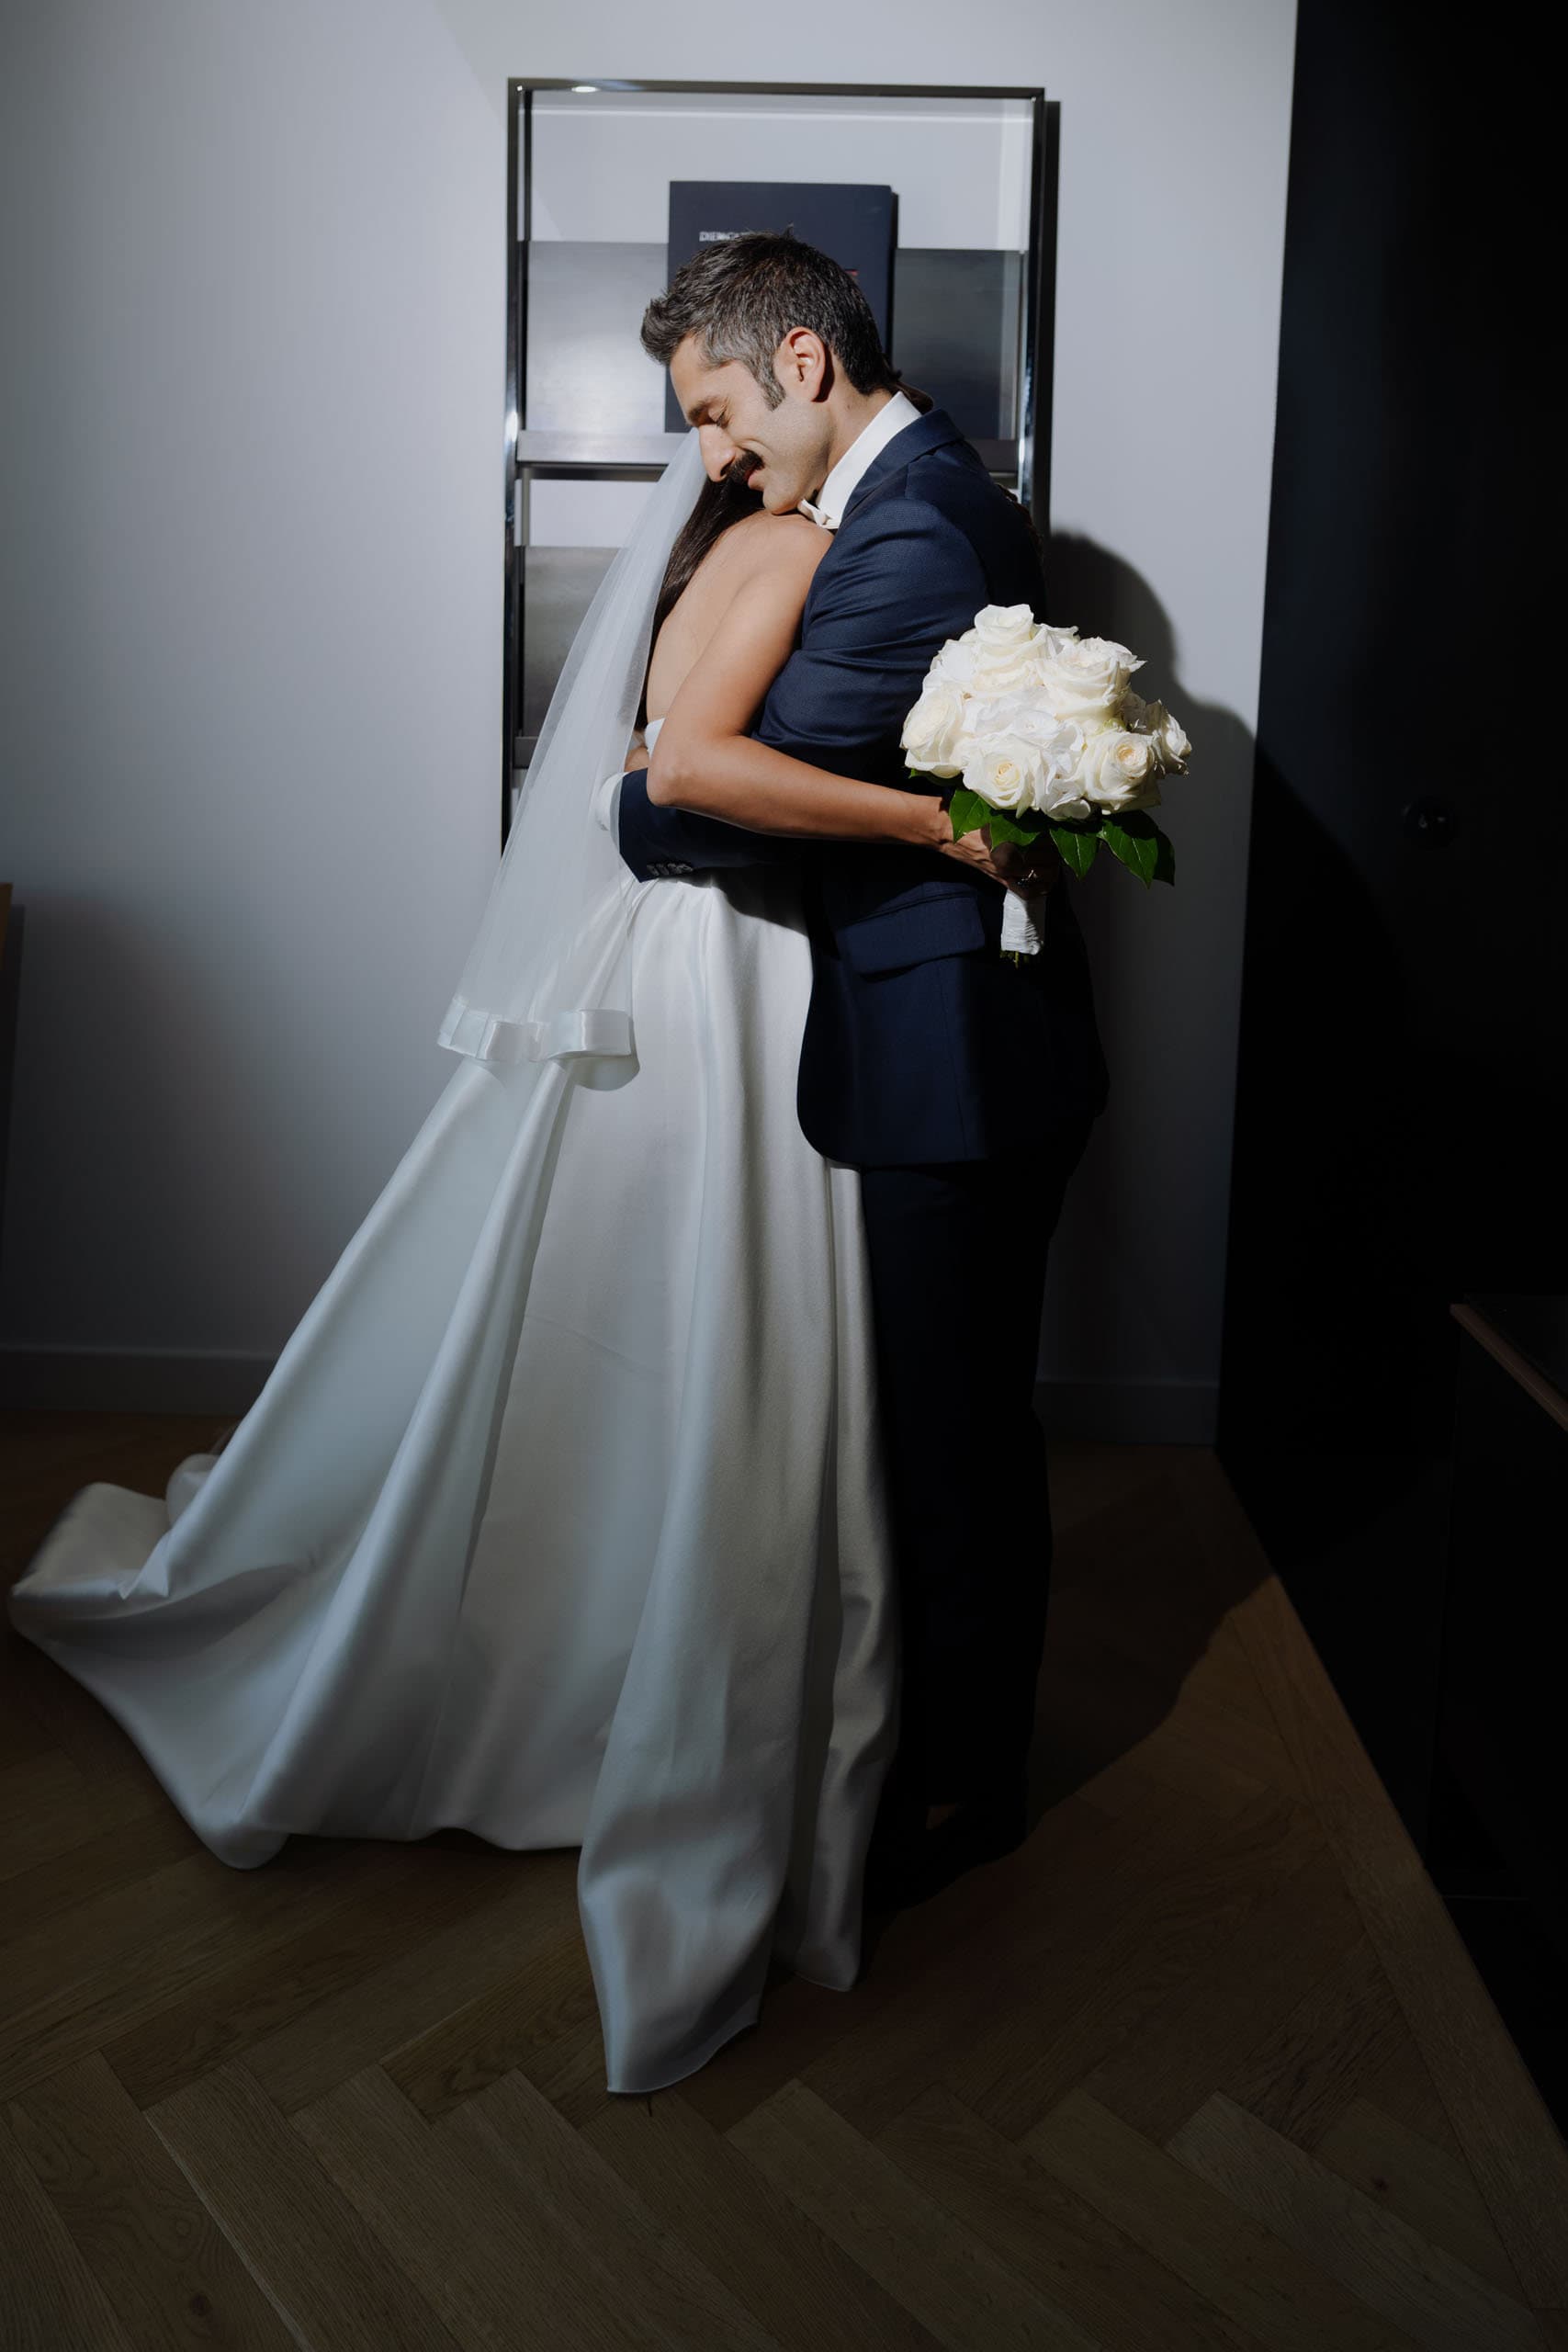 modern wedding photography in munich and tegernsee12h52m rn100868